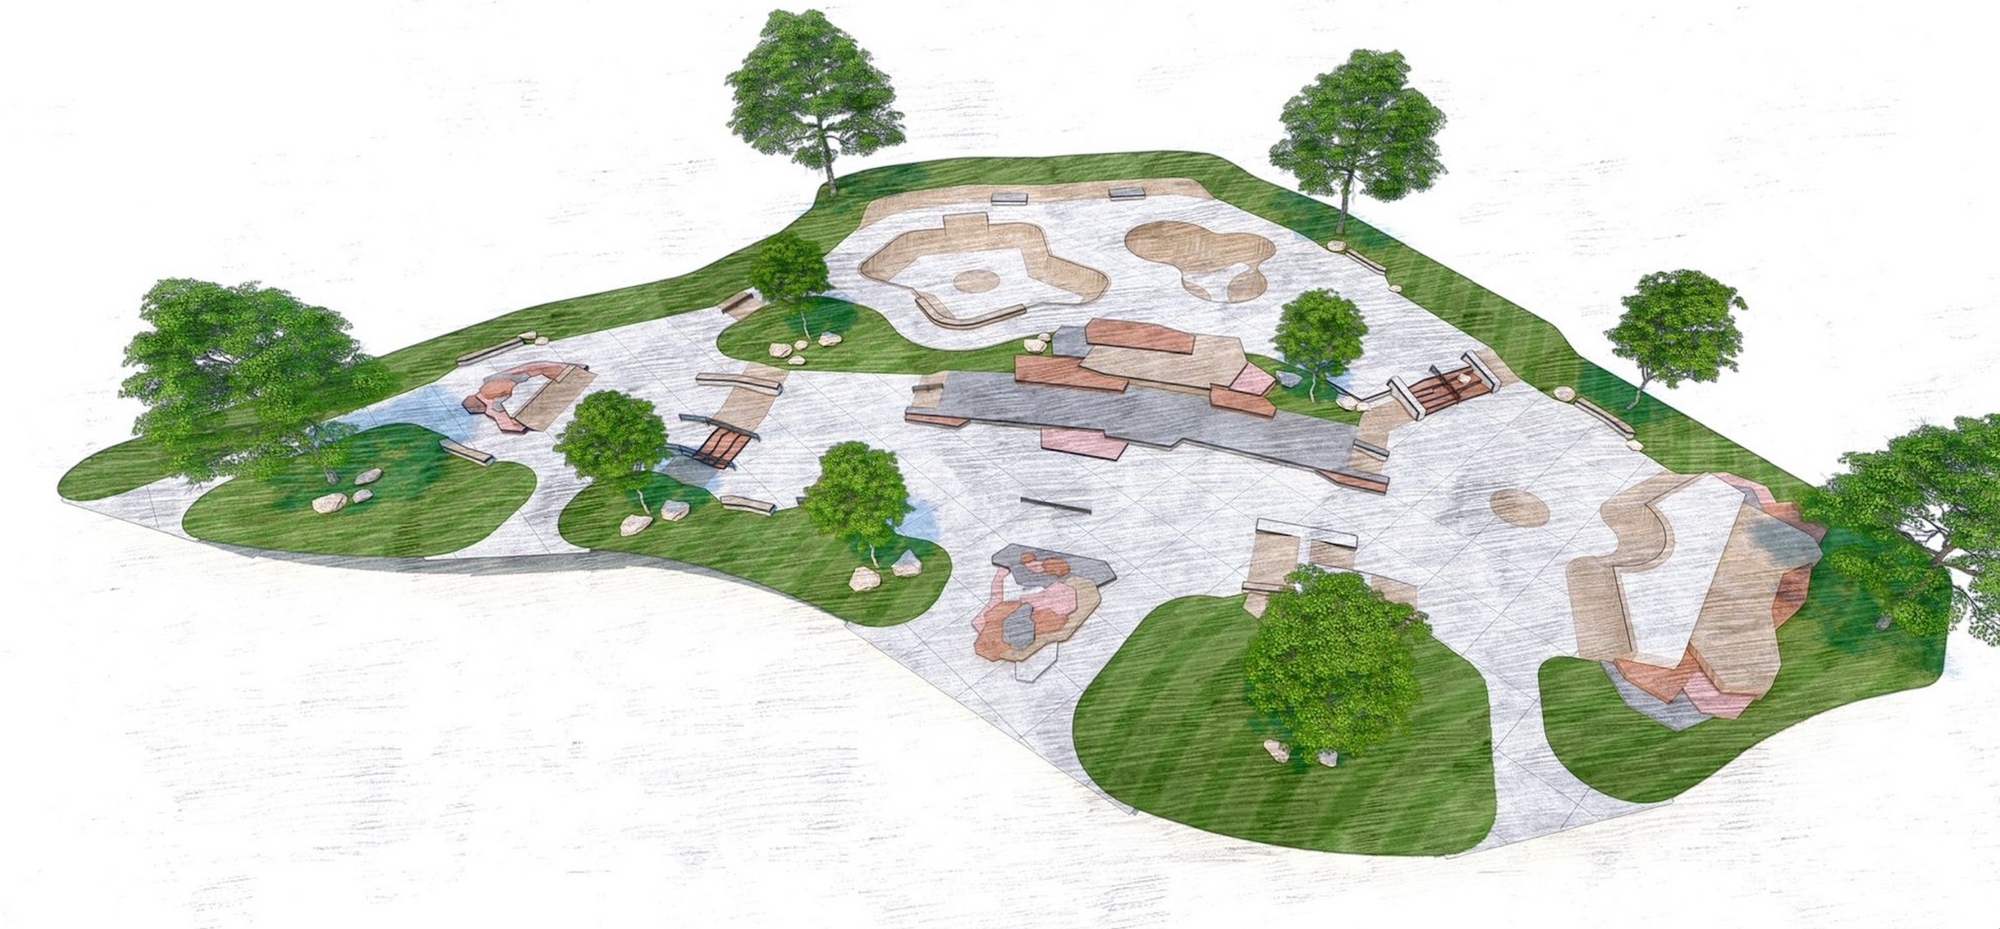 See the latest renderings of Sioux Falls' new skate park